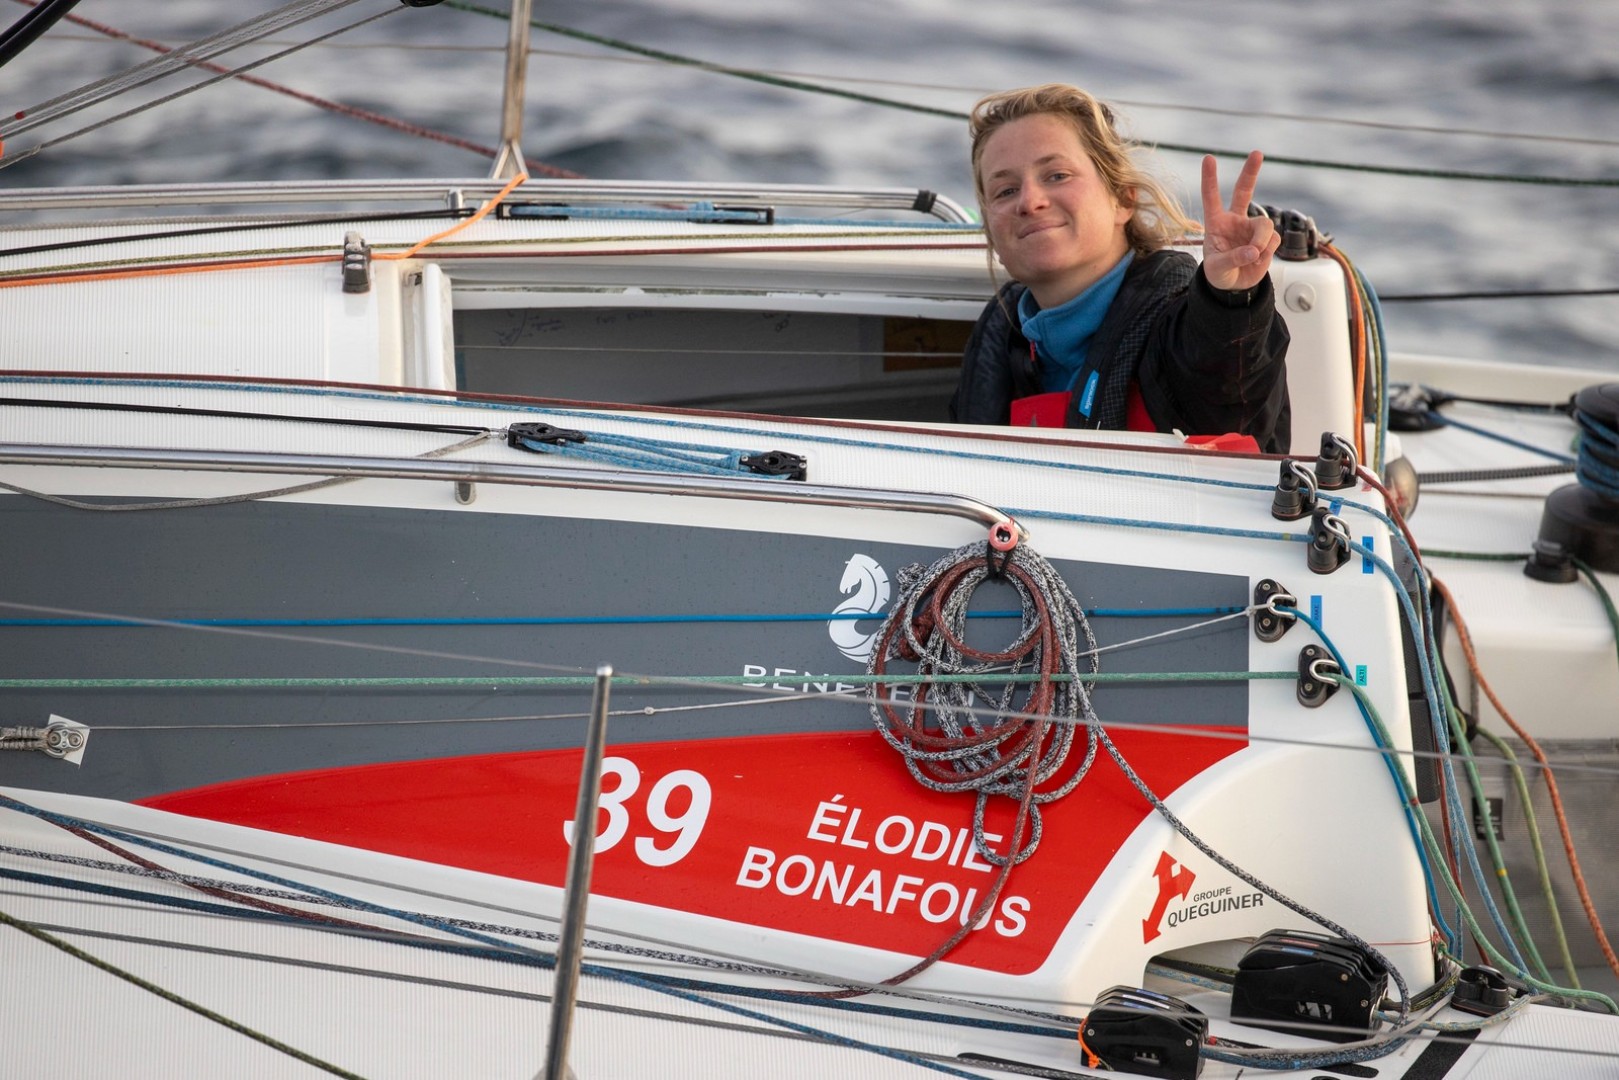 Elodie Bonafous in good spirits in the Celtic Sea en route to The Fastnet

Photo ©Alexis Courcoux